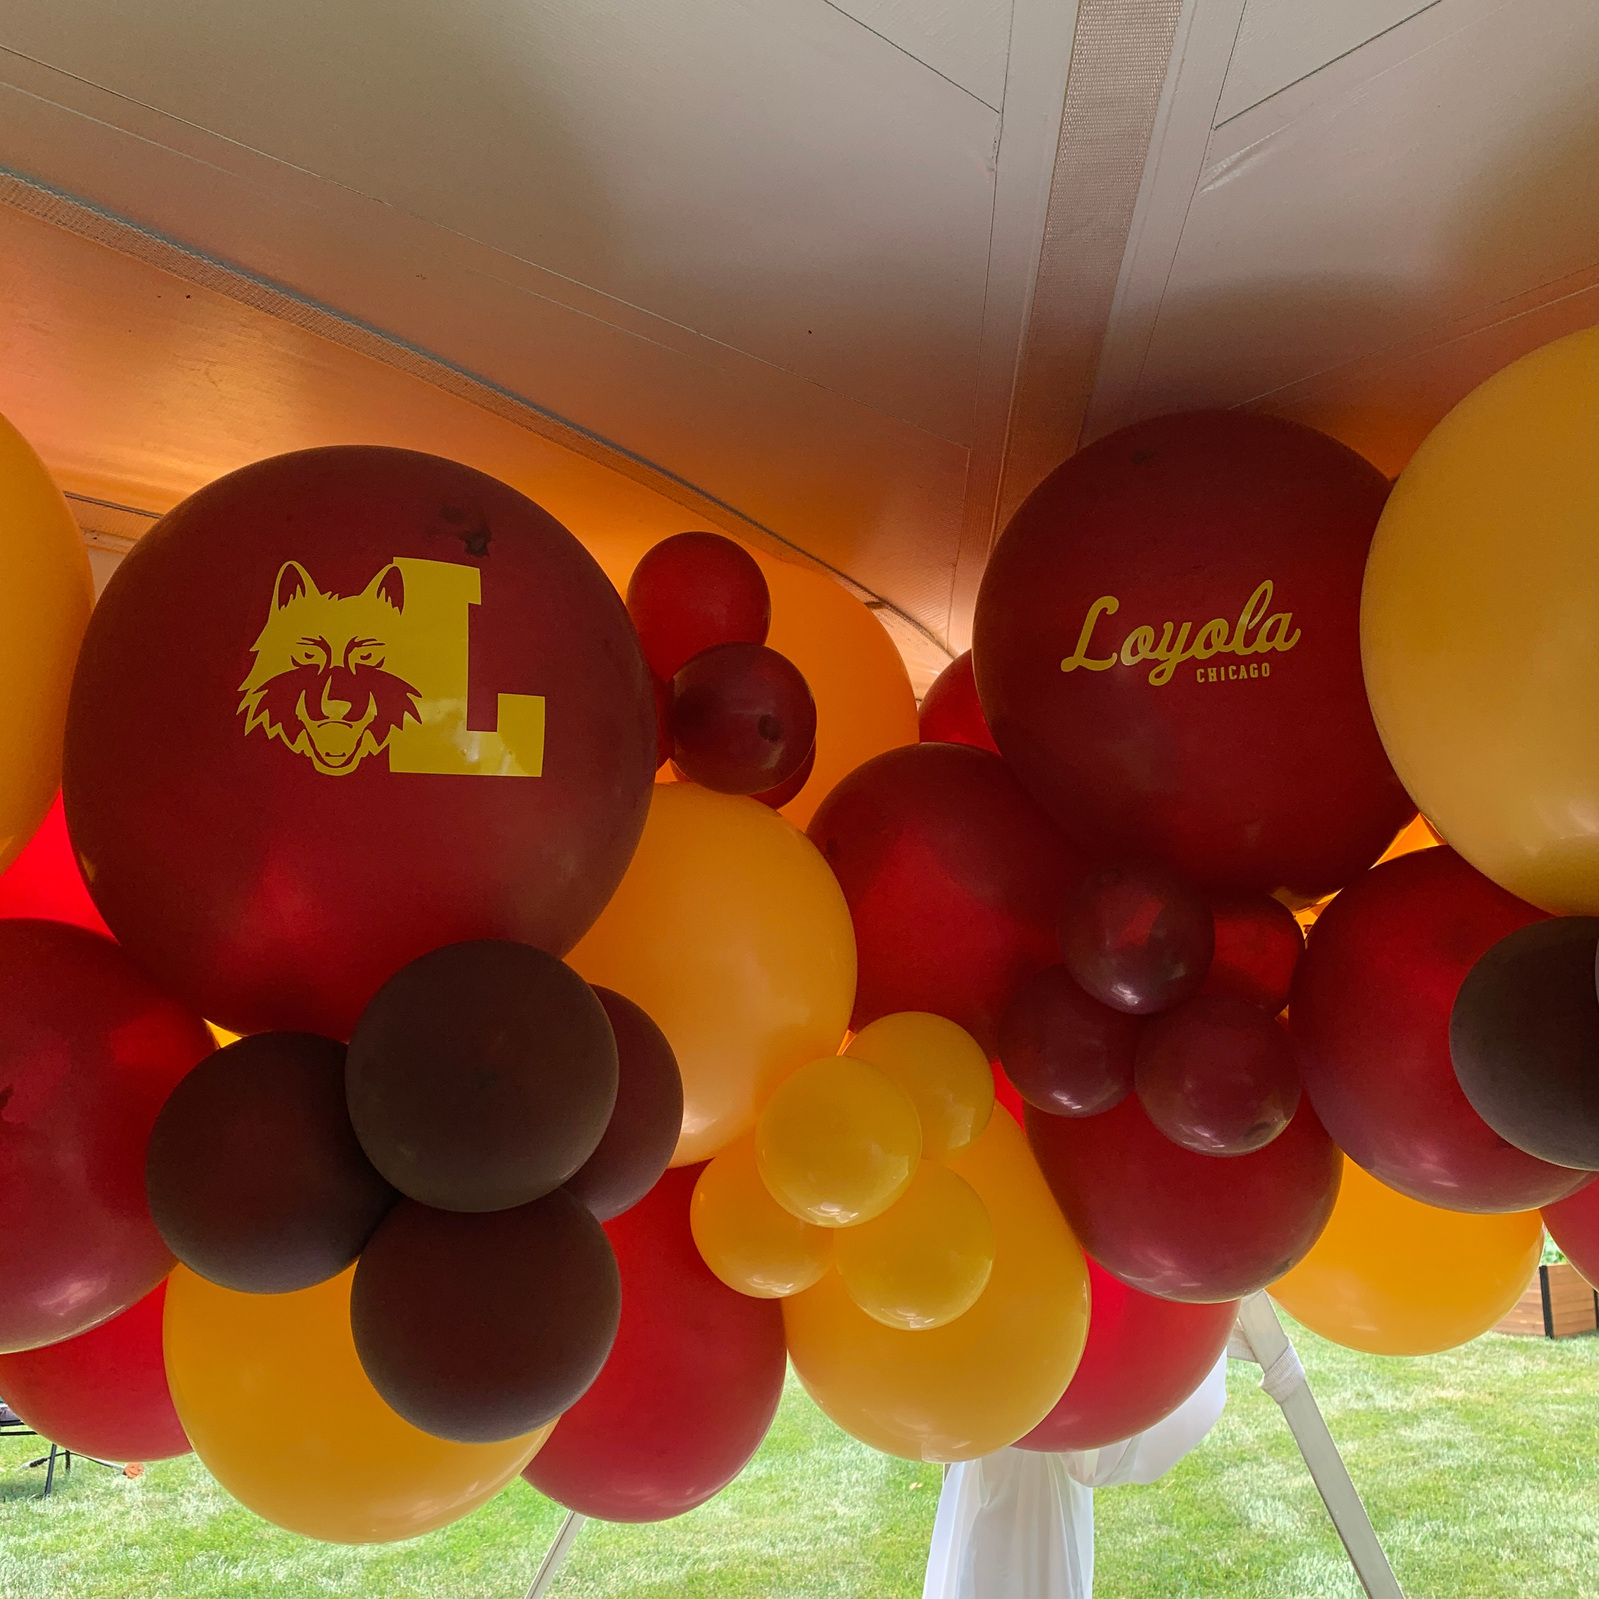 a bundle of red brown and yellow balloons mounted to a white tent with some red balloons with text of a university logo 